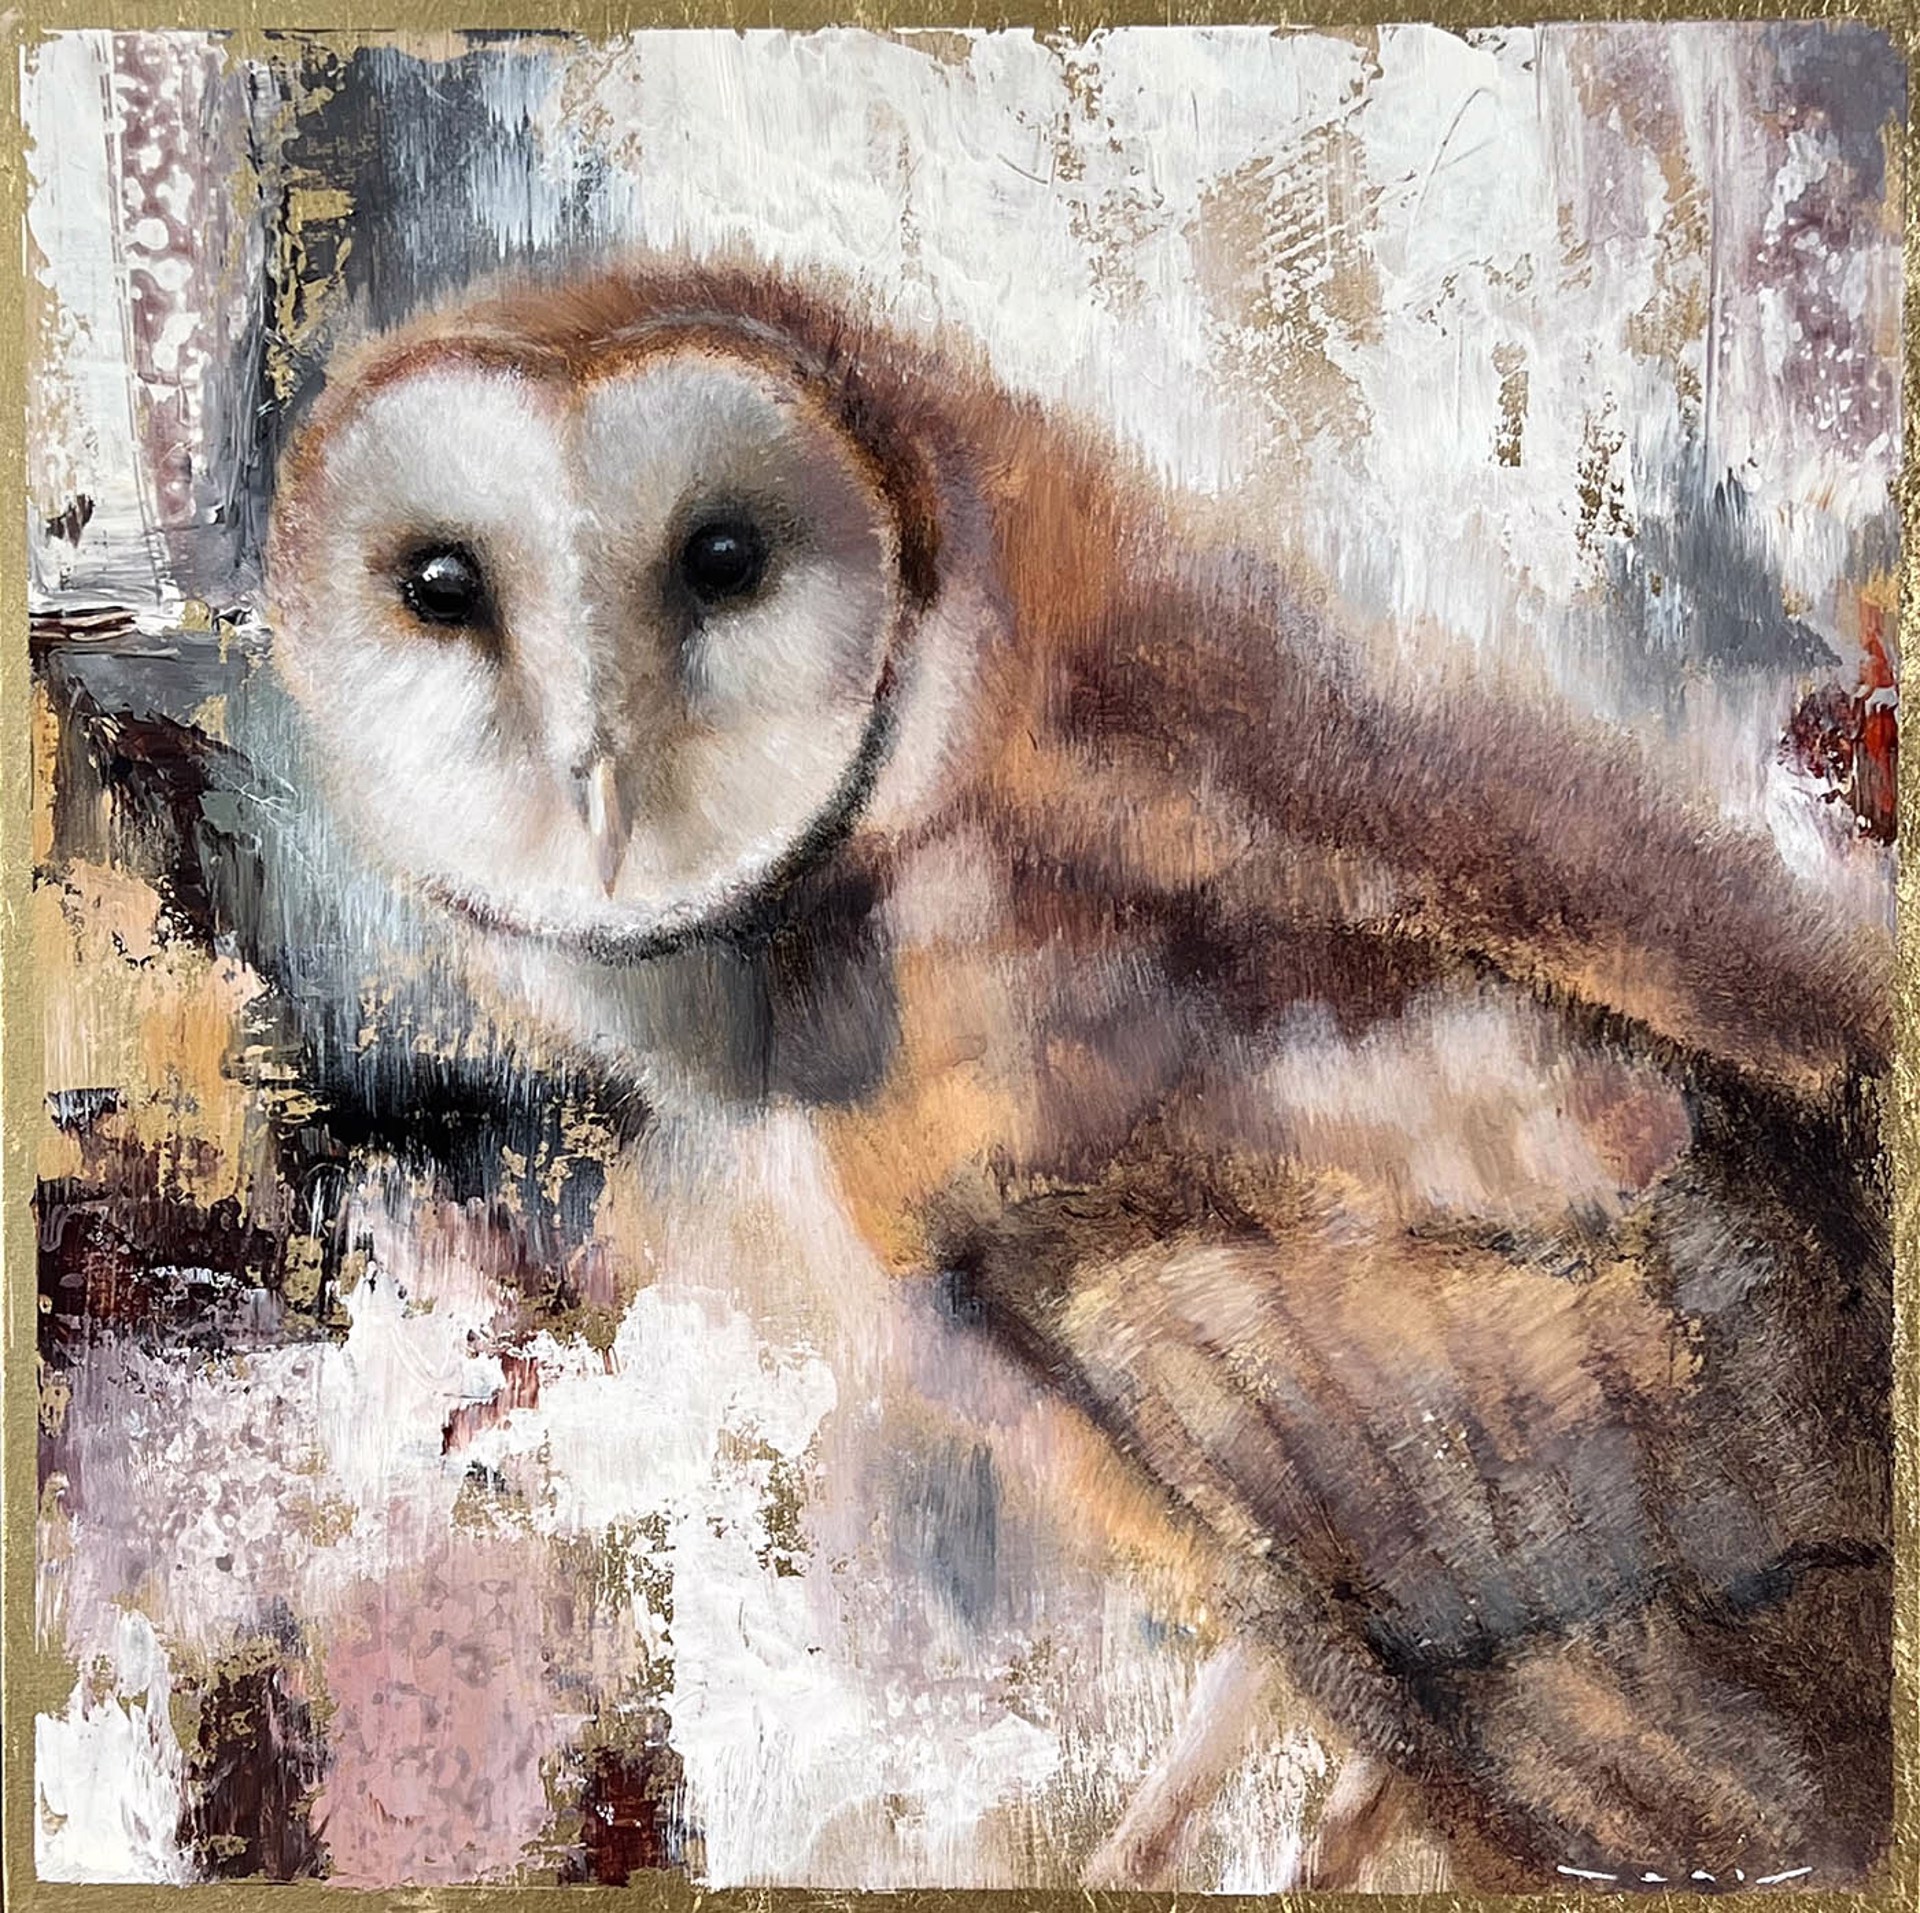 Original Acrylic Painting By Nealy Riley Featuring A Barn Owl Over Abstract Tonal Background With Gold Leaf Details